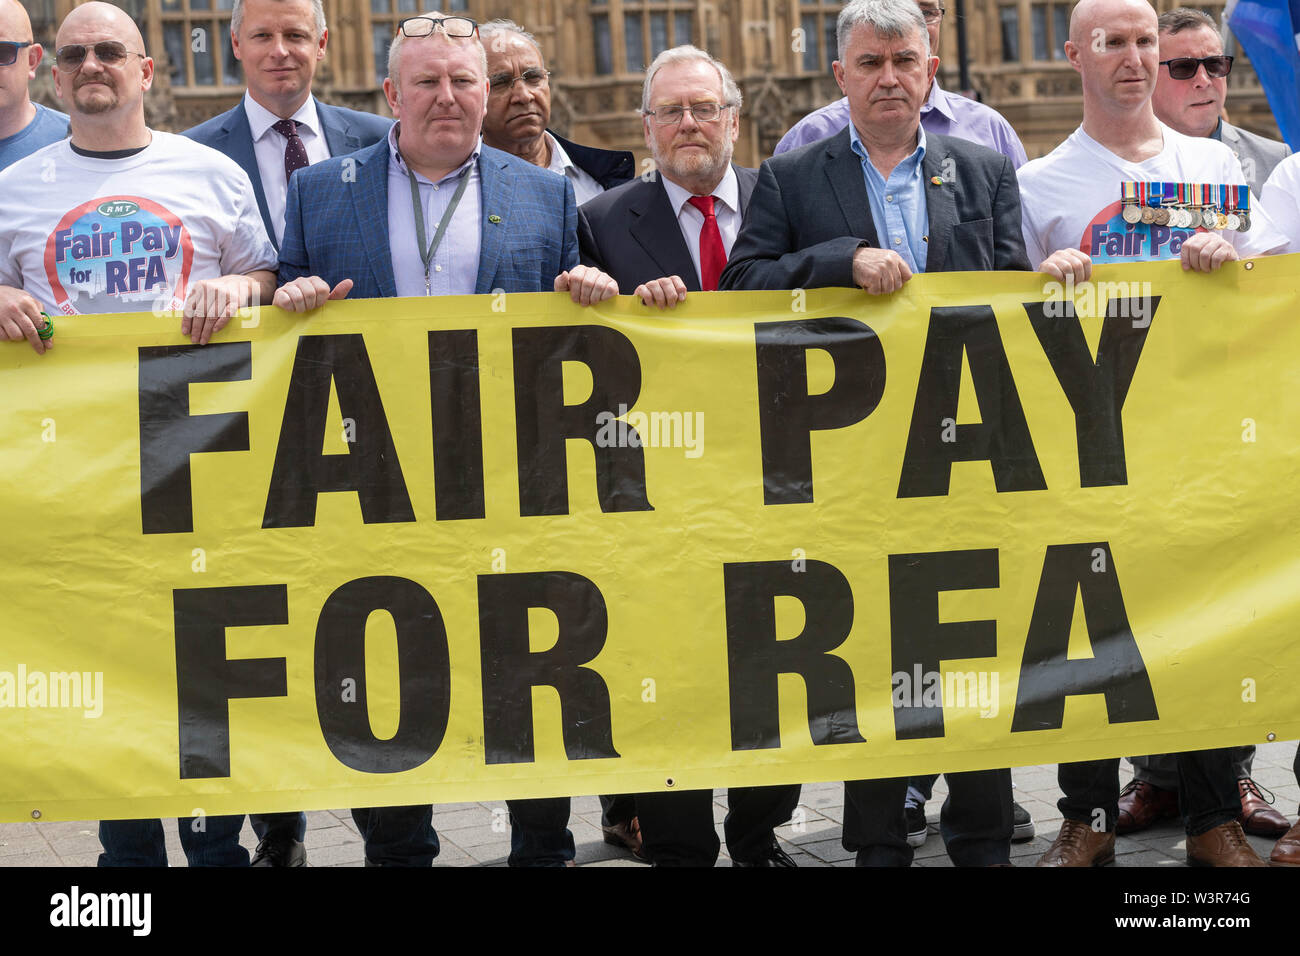 London 17th July 2019 A parliamentary lobby by the Rail Maritime and Transport workers union on behalf of the Royal Fleet Auxiliary seafarers over below inflation pay rises. 'Fair pay for the RFA' banner with John Spellar MP (centre) and Mick Cash, General Secretary of the RMT  on his right Credit Ian Davidson/Alamy Live News Stock Photo